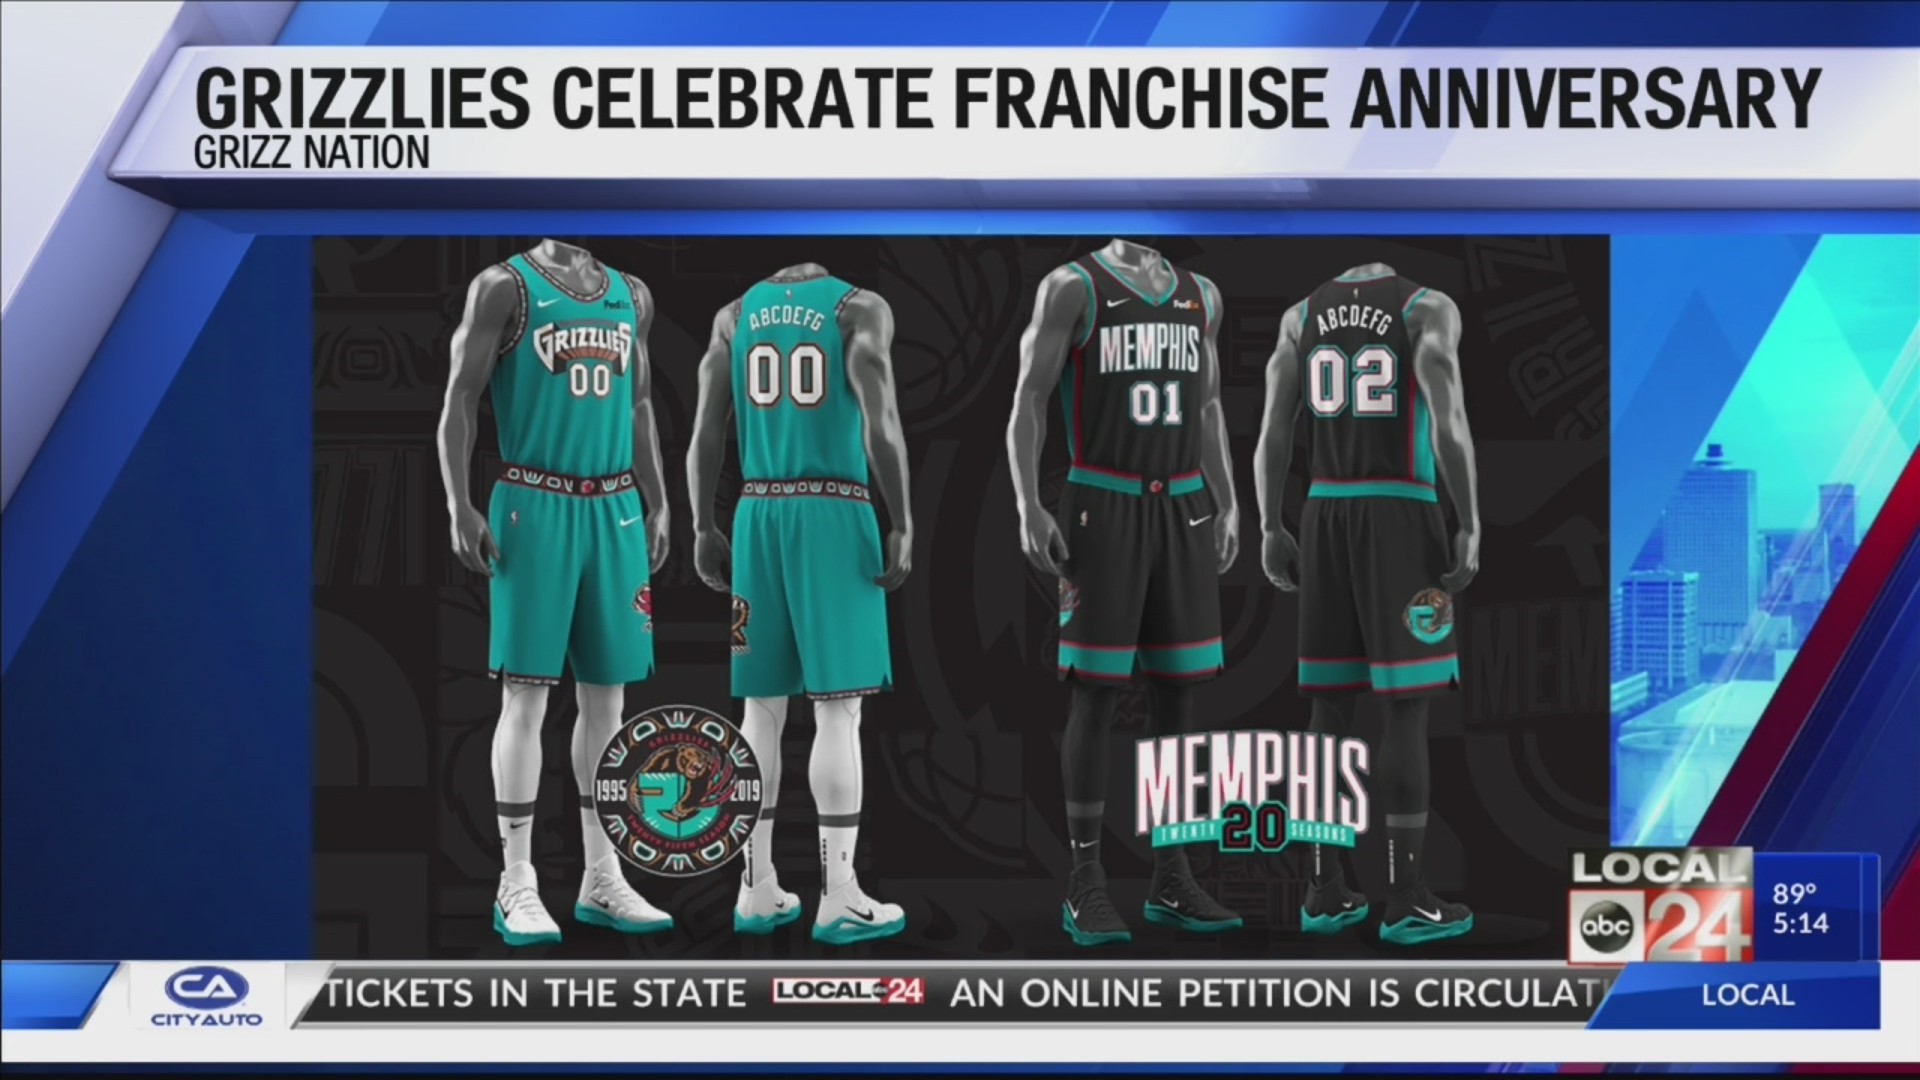 Vancouver Grizzlies 25th Anniversary Throwback Jerseys - Media Day